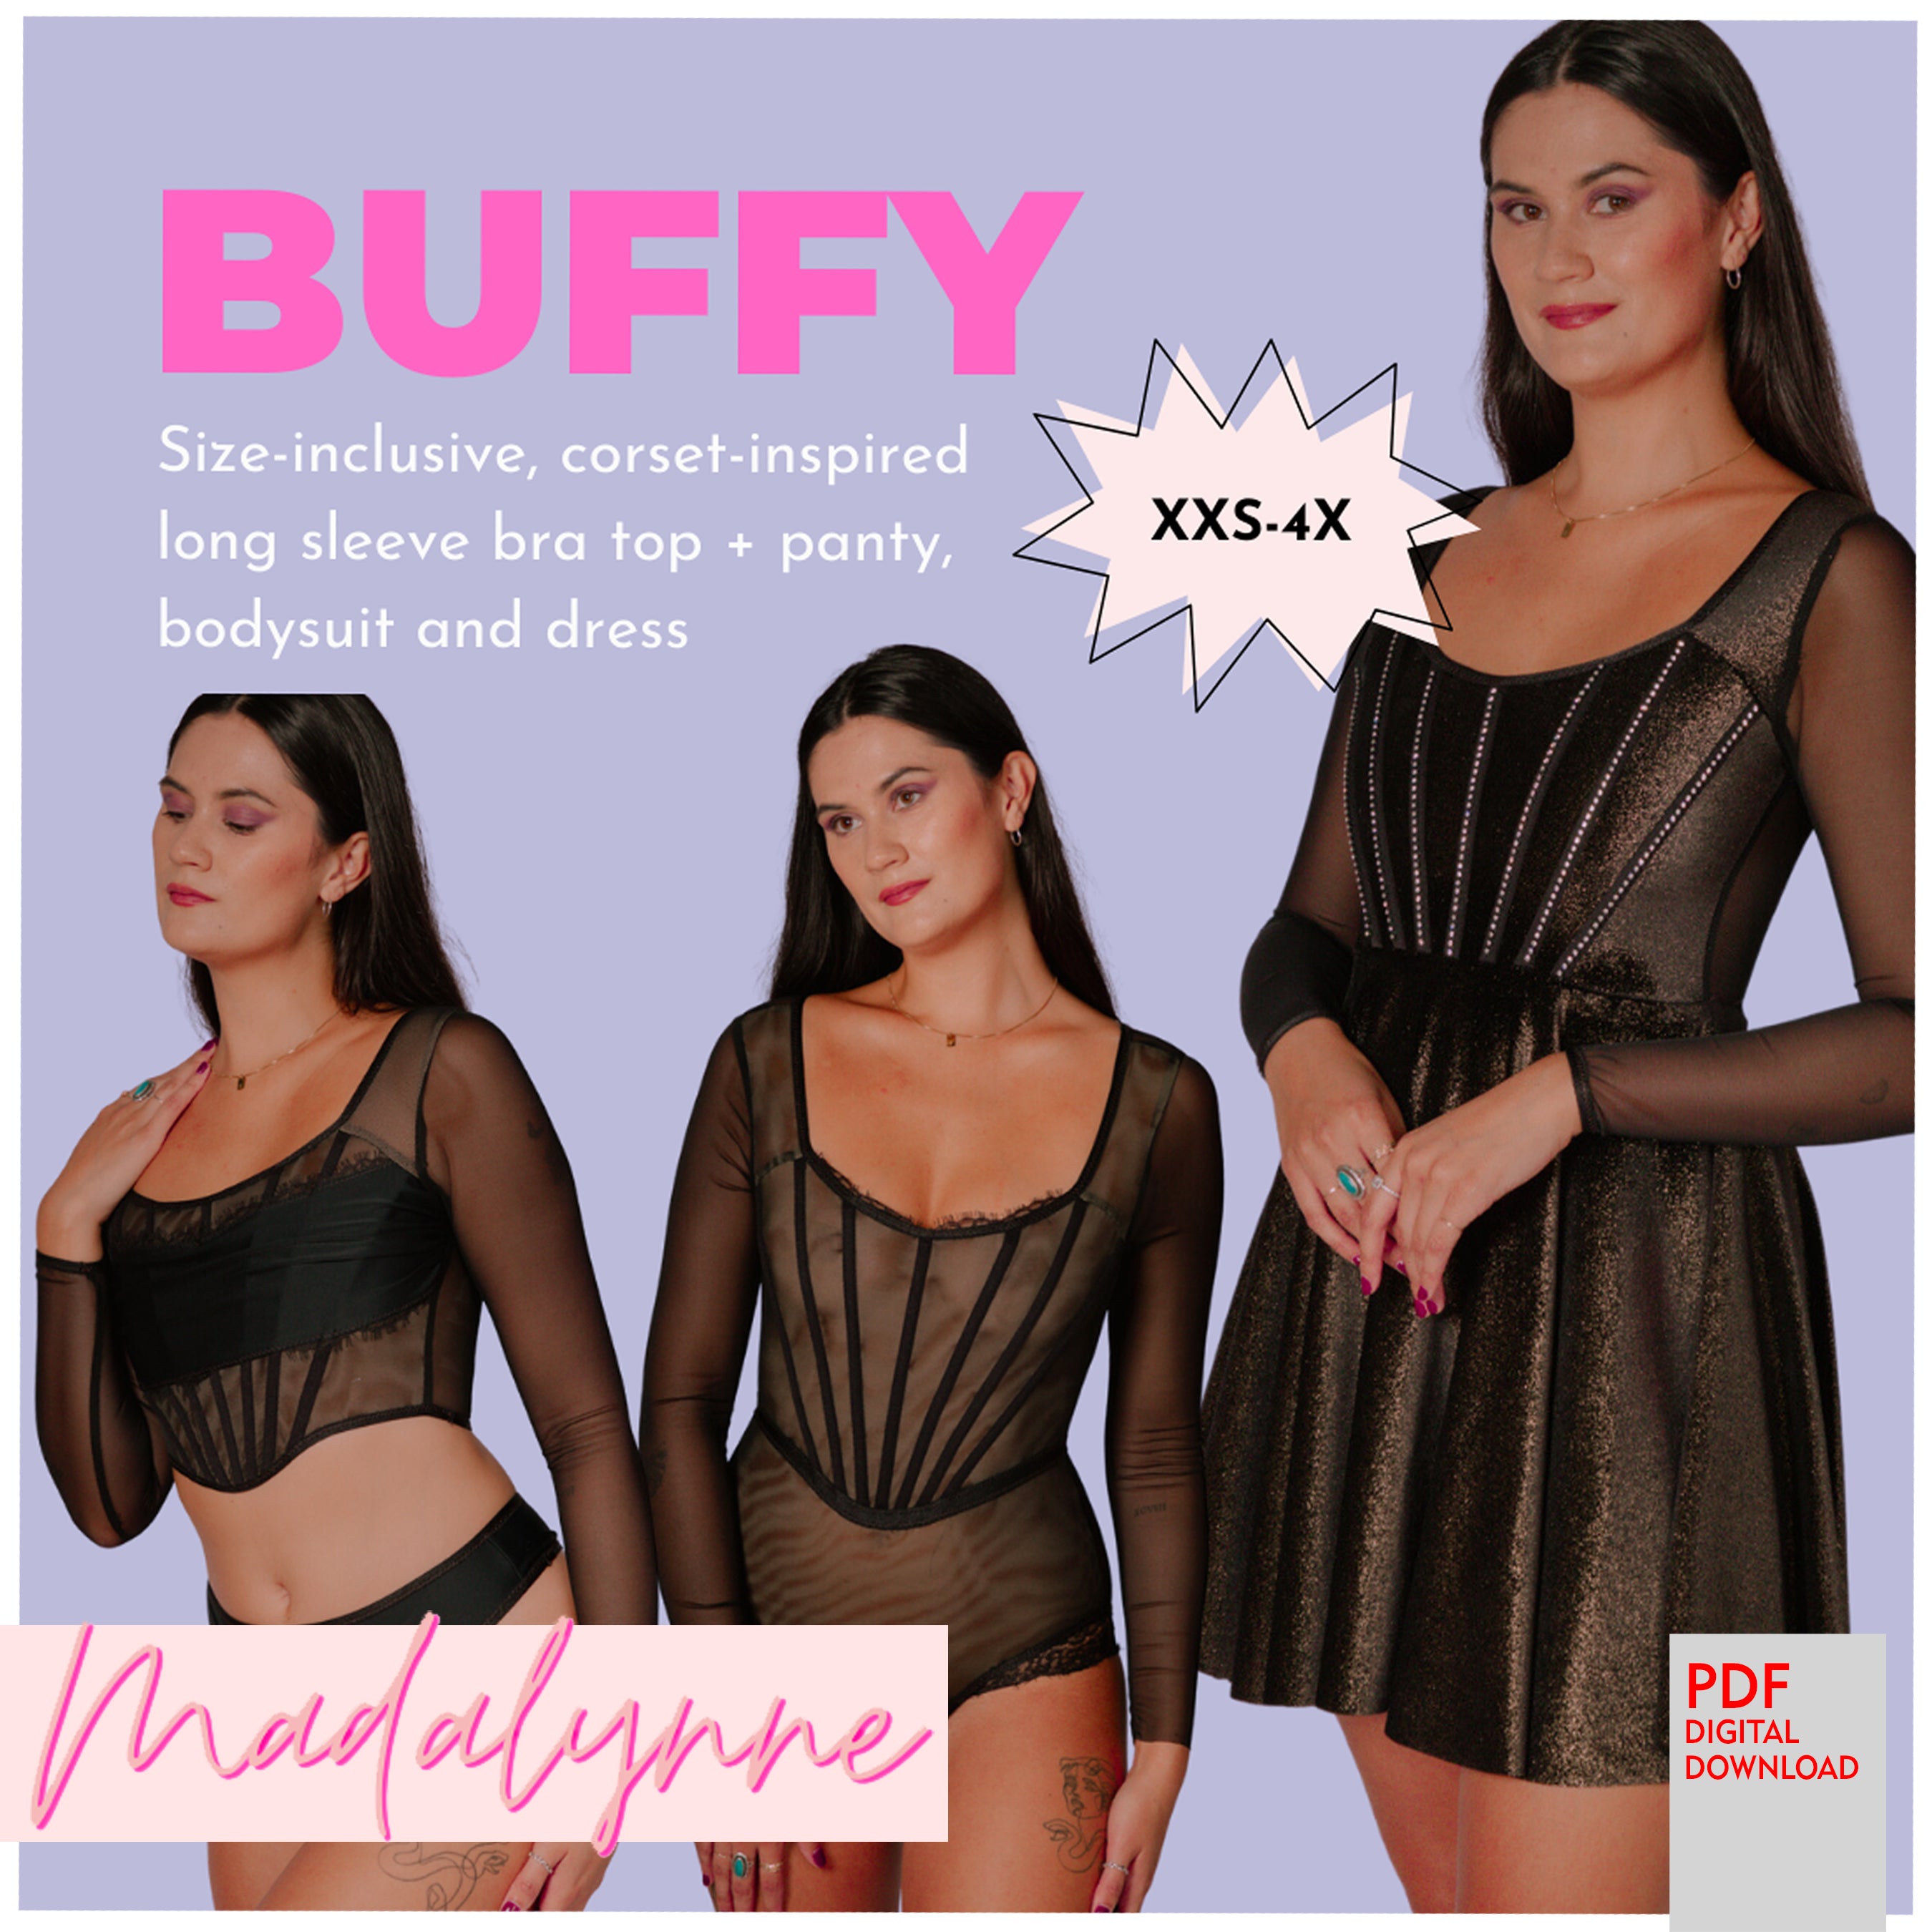 PDF Madalynne Sewing Pattern- Buffy Corset Top and Panty, Bodysuit